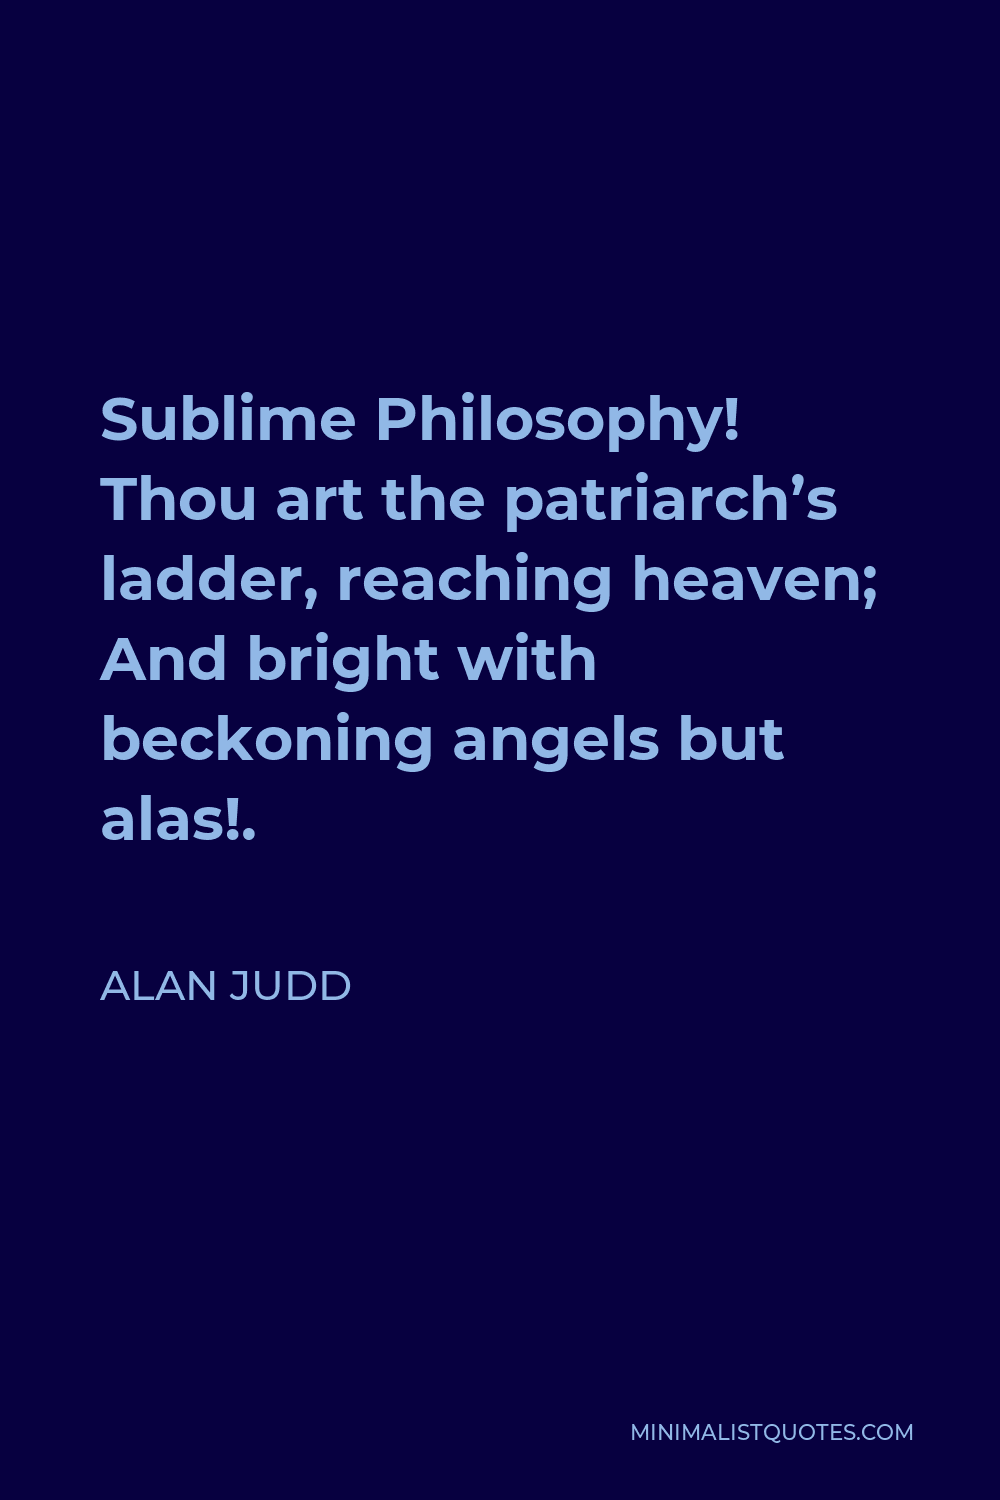 Alan Judd Quote - Sublime Philosophy! Thou art the patriarch’s ladder, reaching heaven; And bright with beckoning angels but alas!.